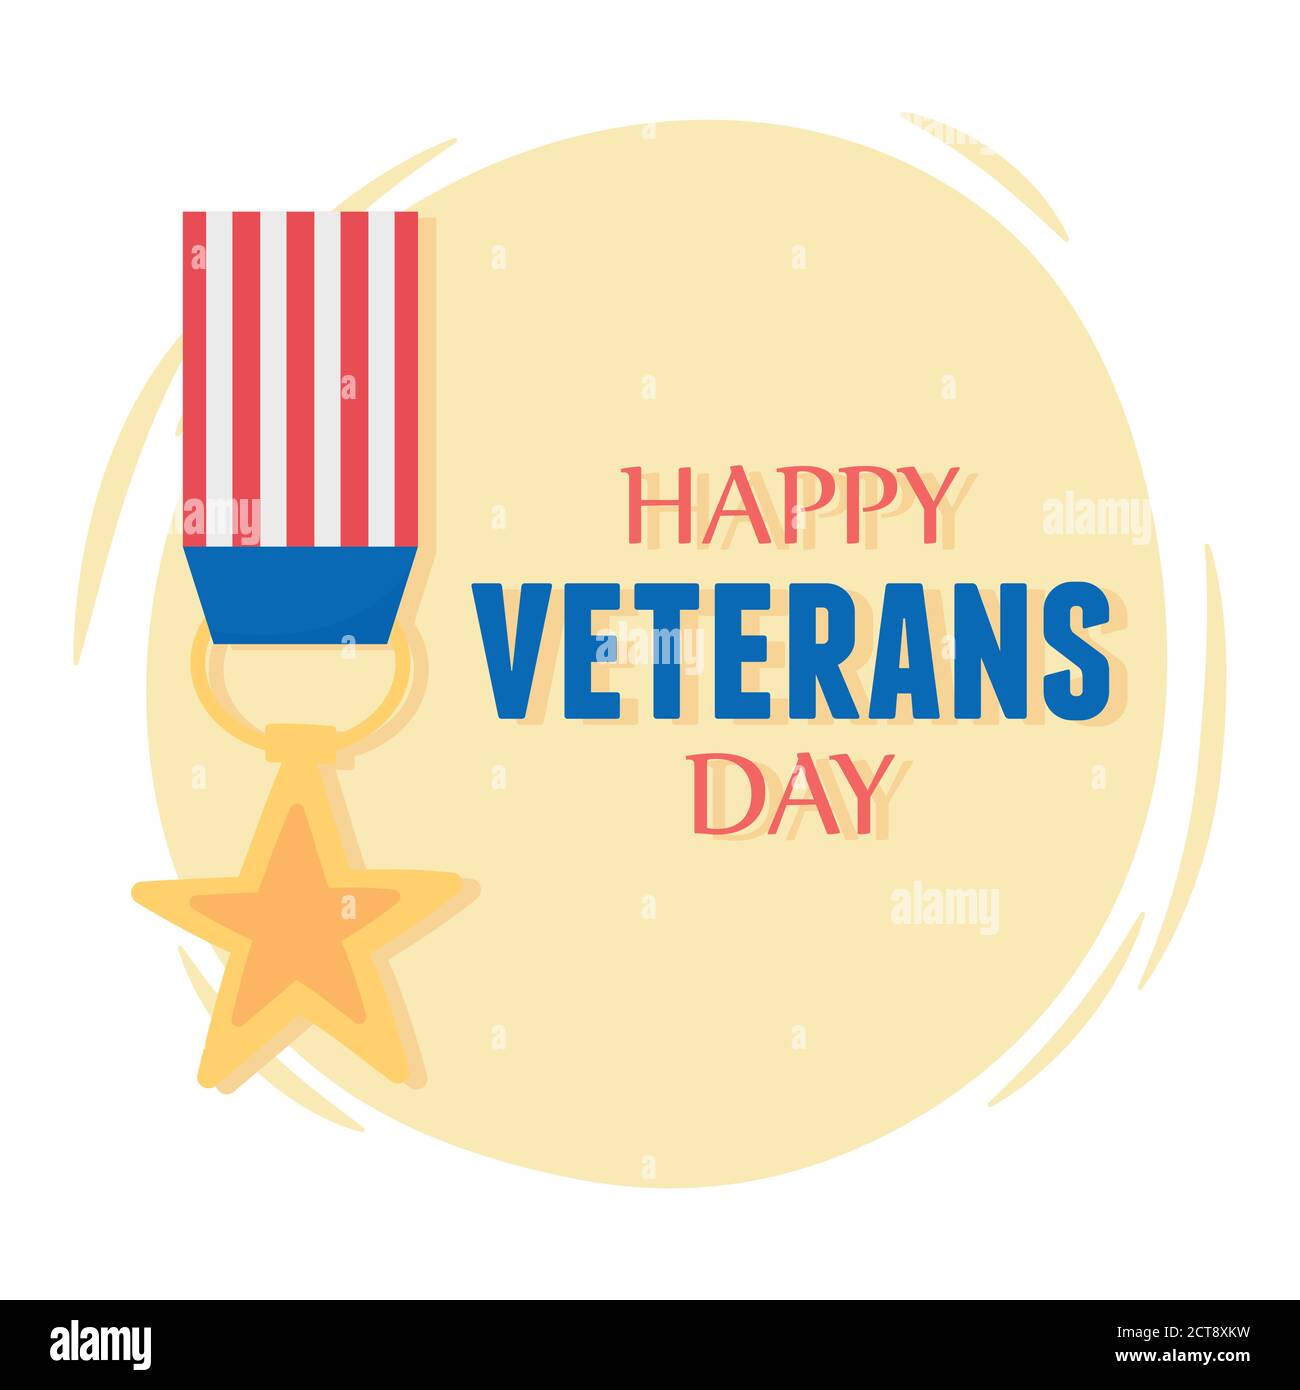 happy veterans day, medal star prize american flag, US military armed forces soldier vector illustration Stock Vector